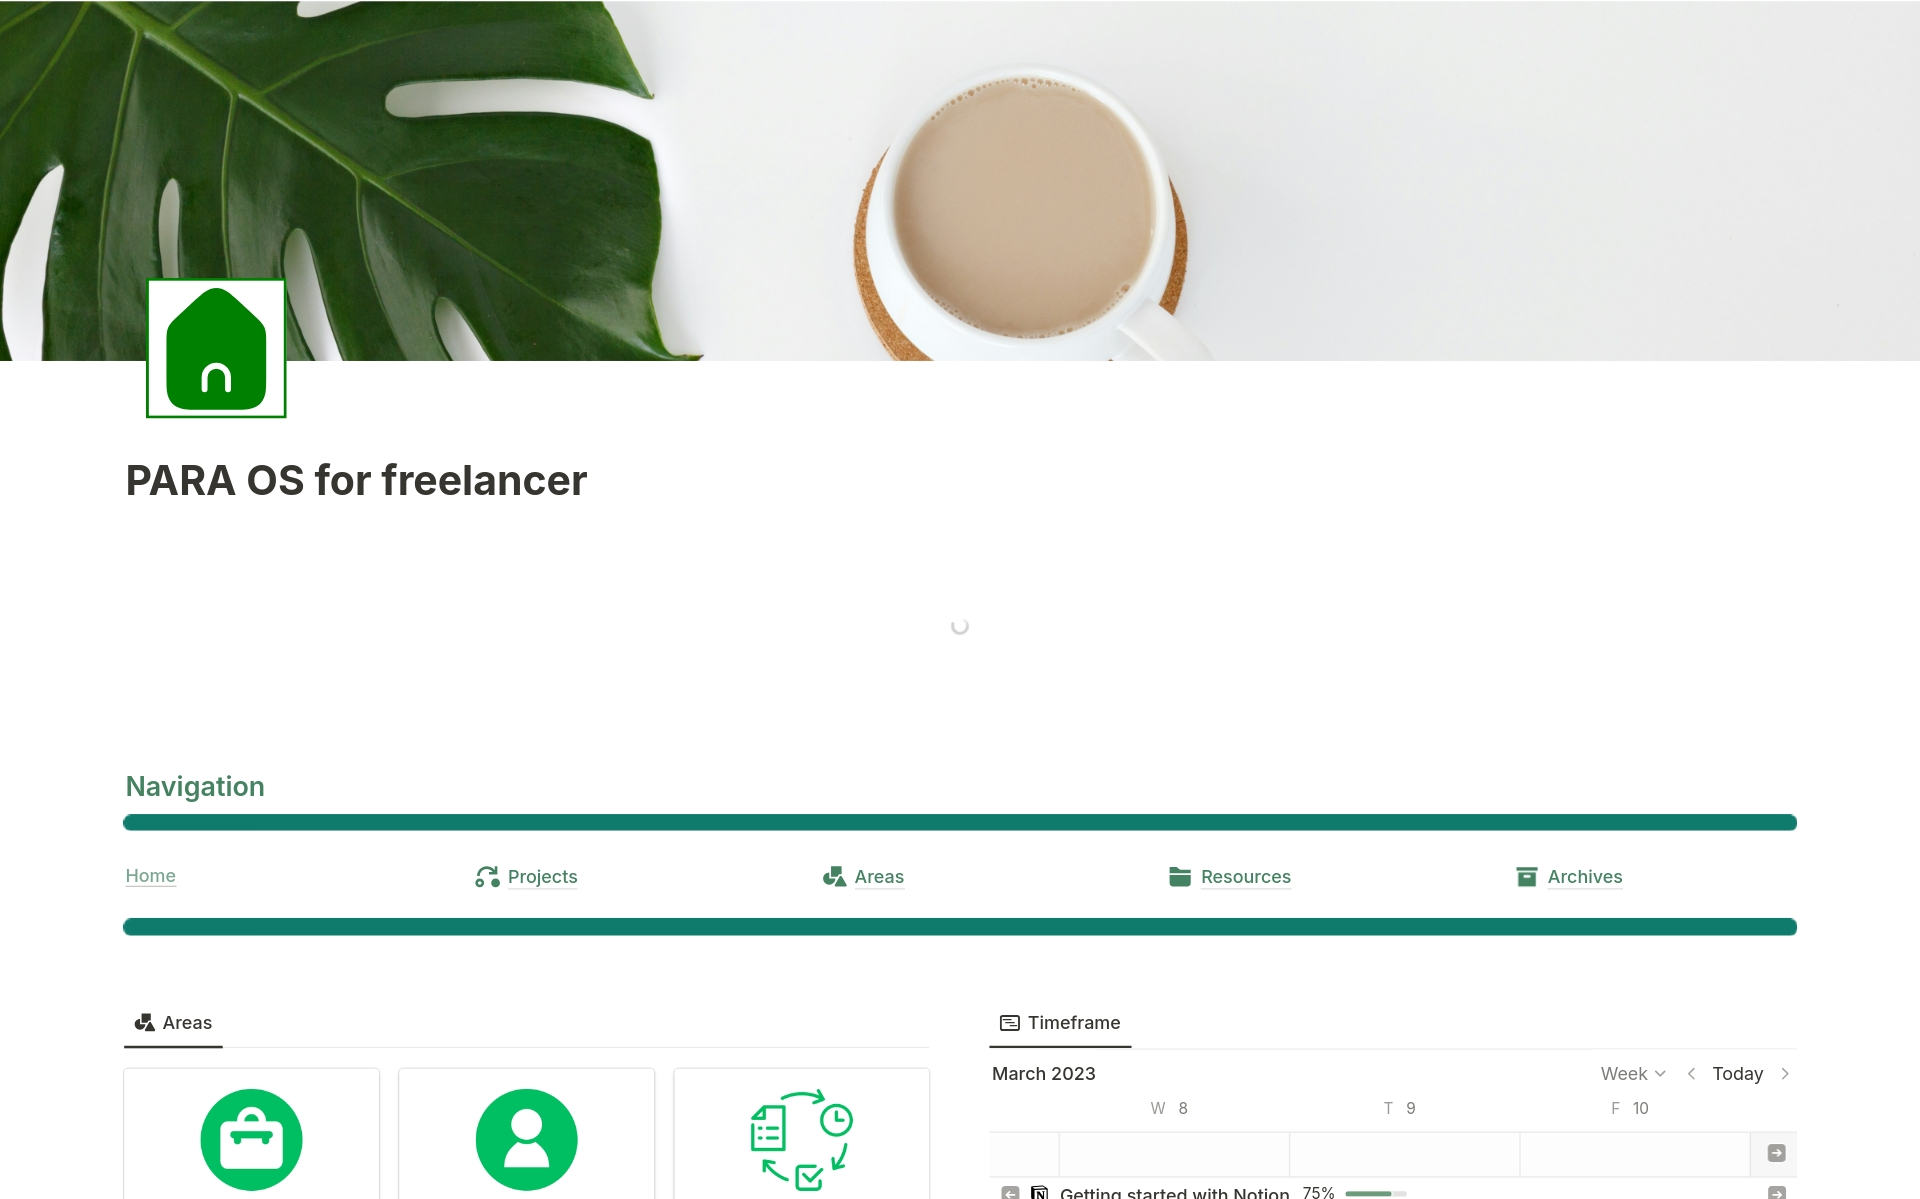 Unlock your freelancing potential with PARA OS for Freelancer, the meticulously crafted Notion template designed to streamline your workflow and supercharge your productivity. Inspired by the revolutionary PARA method (Projects, Areas, Resources, Archives), this template is your 